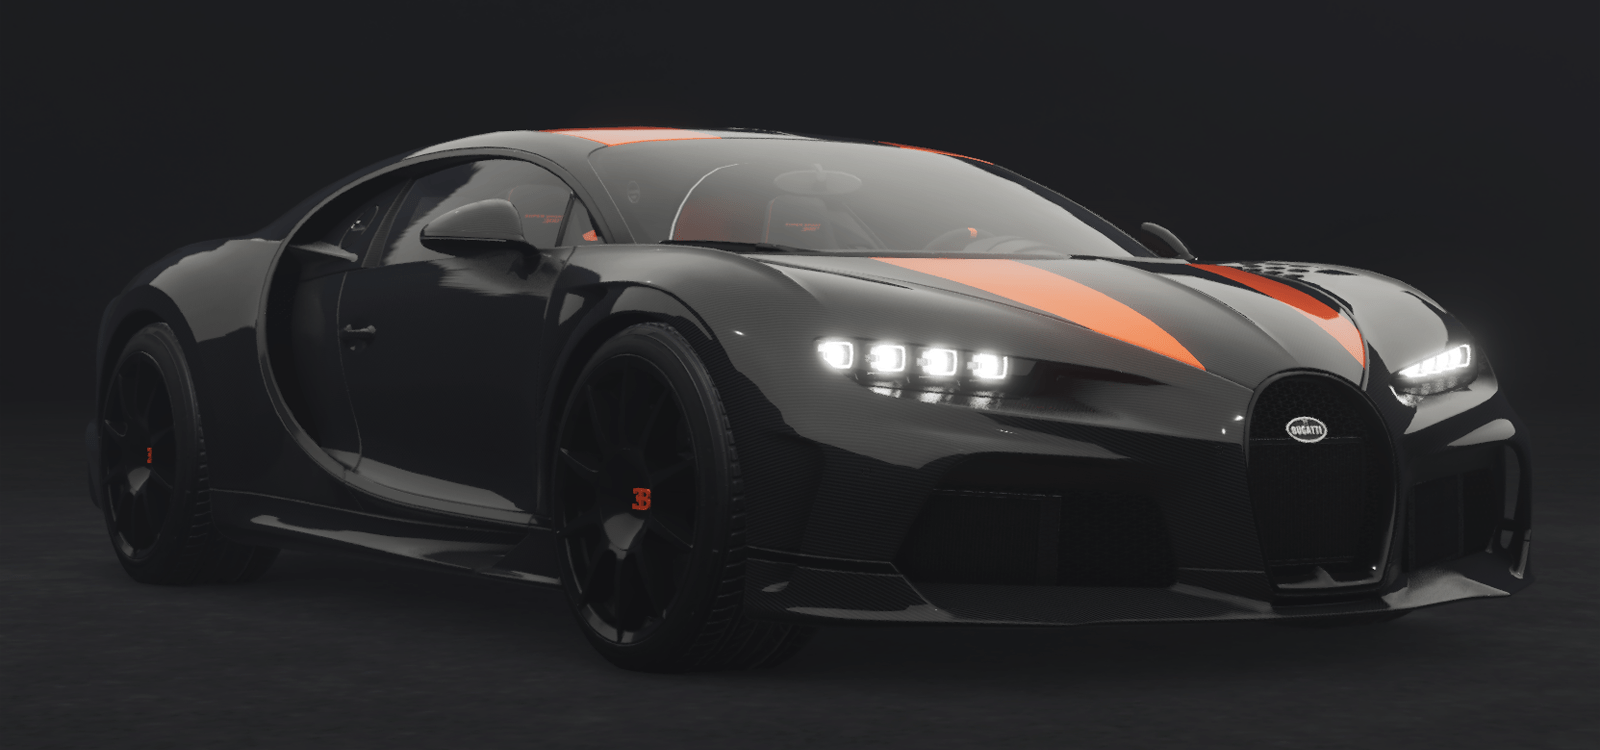 https://static.wikia.nocookie.net/thecrew/images/c/c7/TC2BugattiChironSS300%2B.png/revision/latest?cb=20221229035106